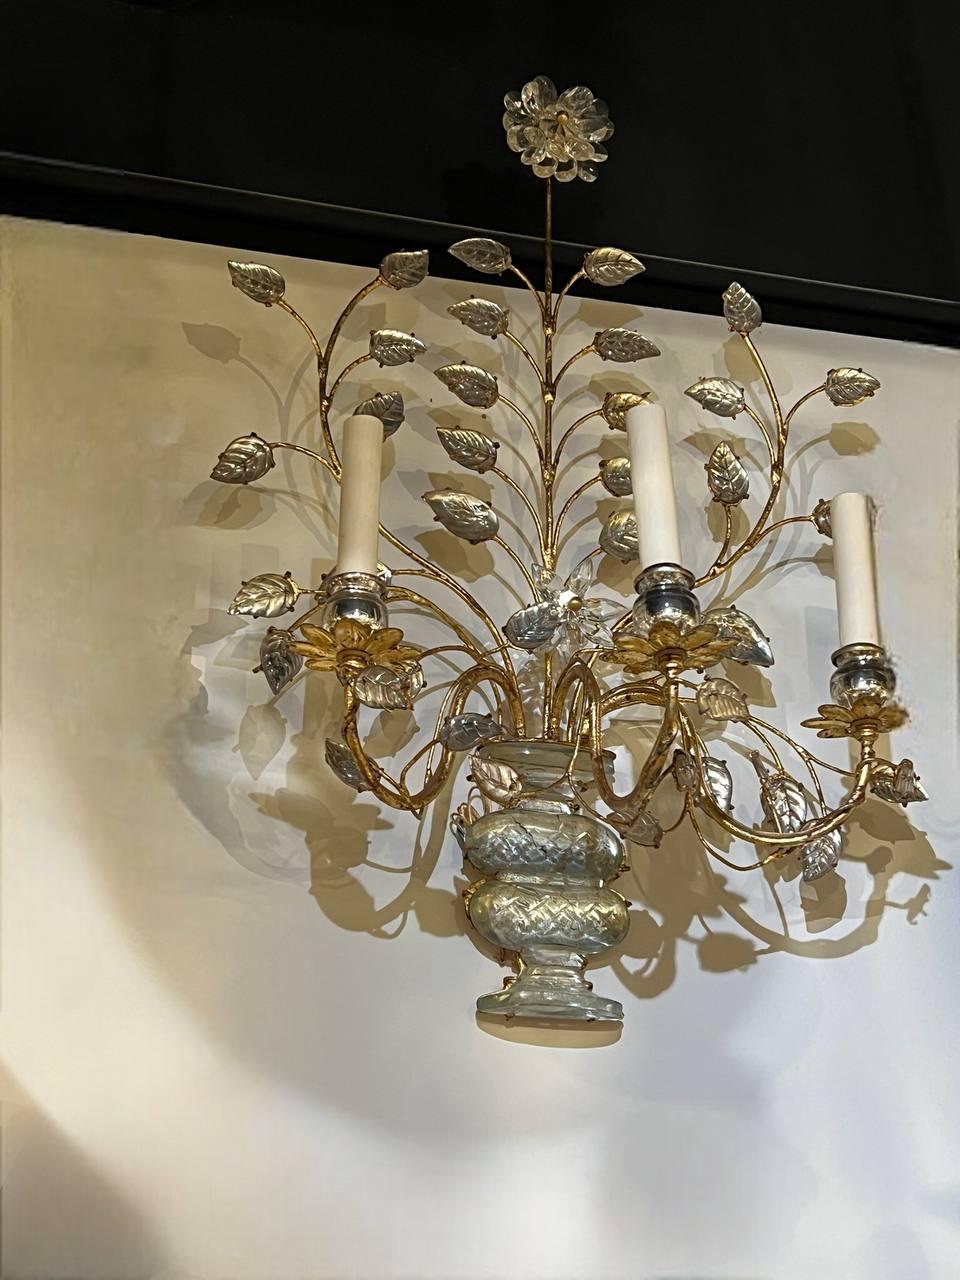 French Provincial 1930's Large French Bagues Gilt Metal Sconces with 3 lights For Sale